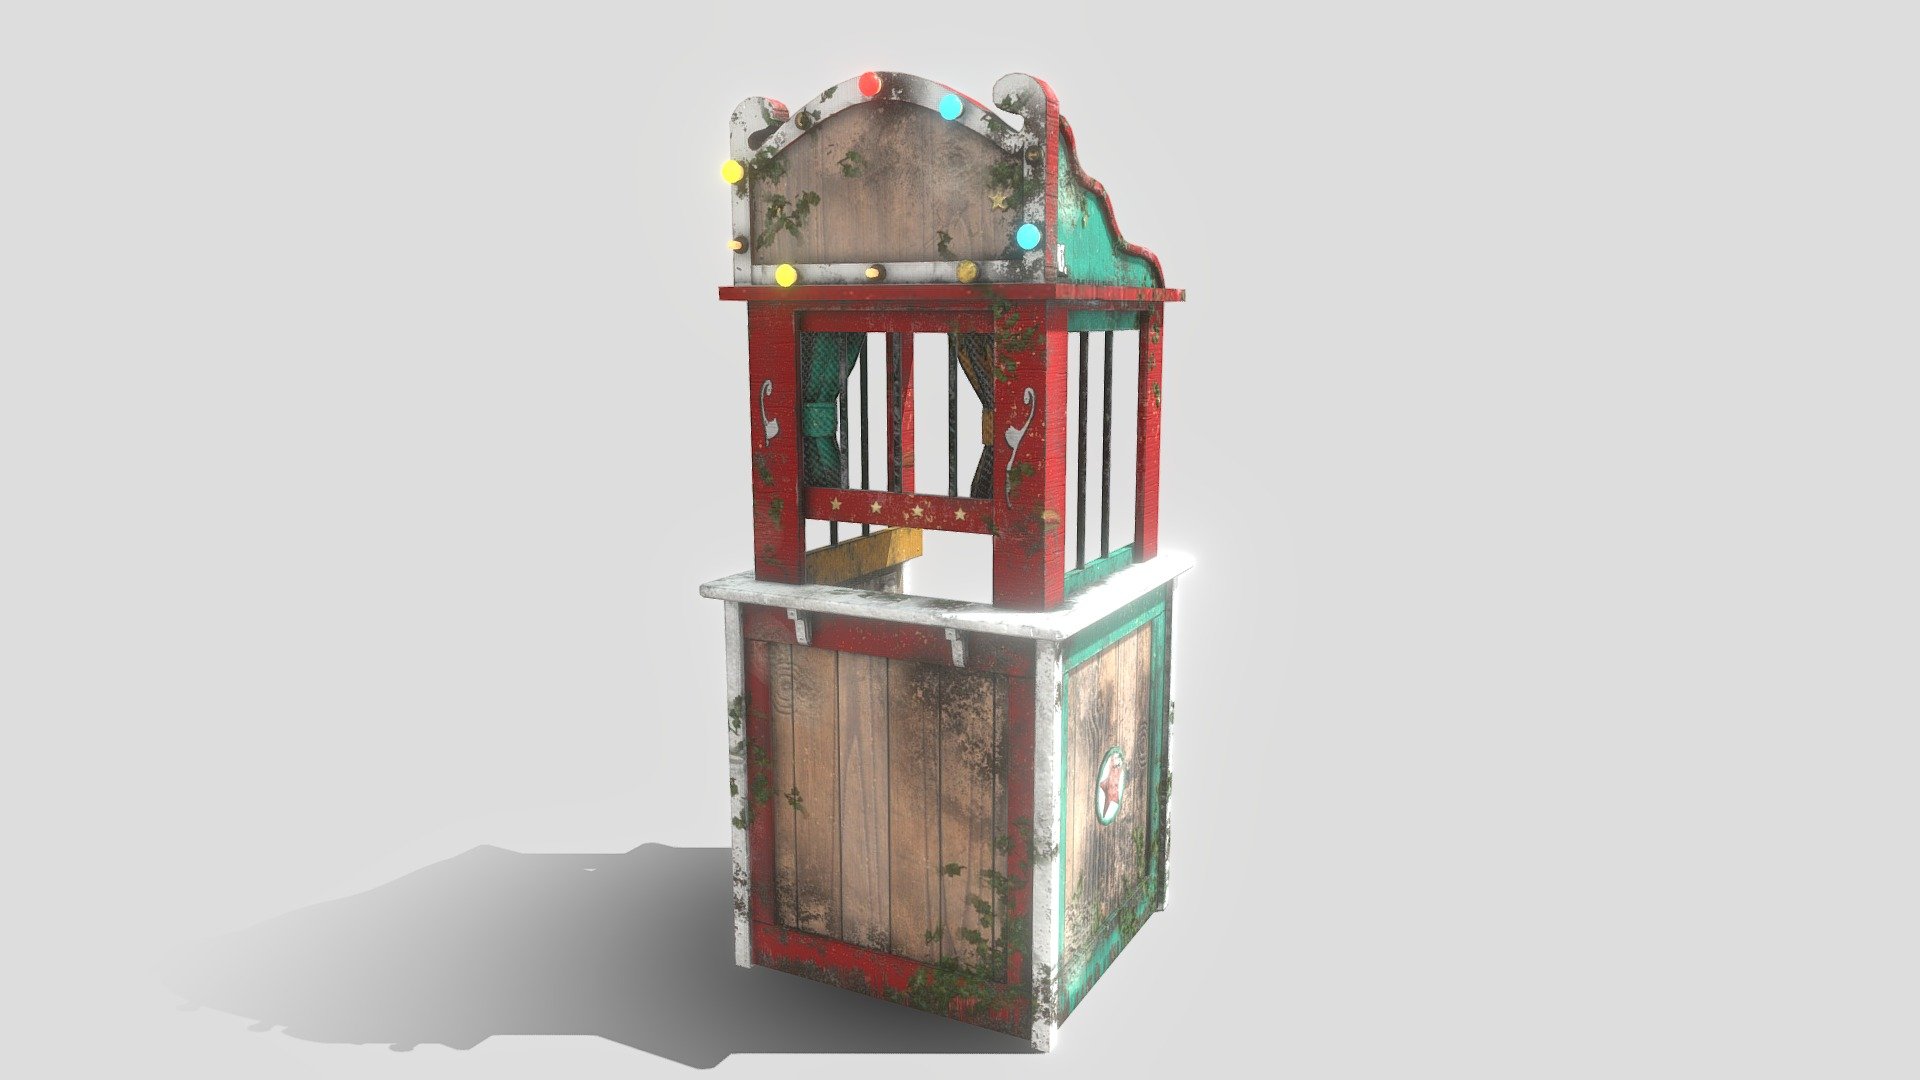 External Art Test for norwich university of the arts.

The breif was to recreate a ticket booth using the reference image provided to us.

modeled in Maya, Textured in Substance Painter - External Exam - Ticket Booth - 3D model by OldSerah 3d model